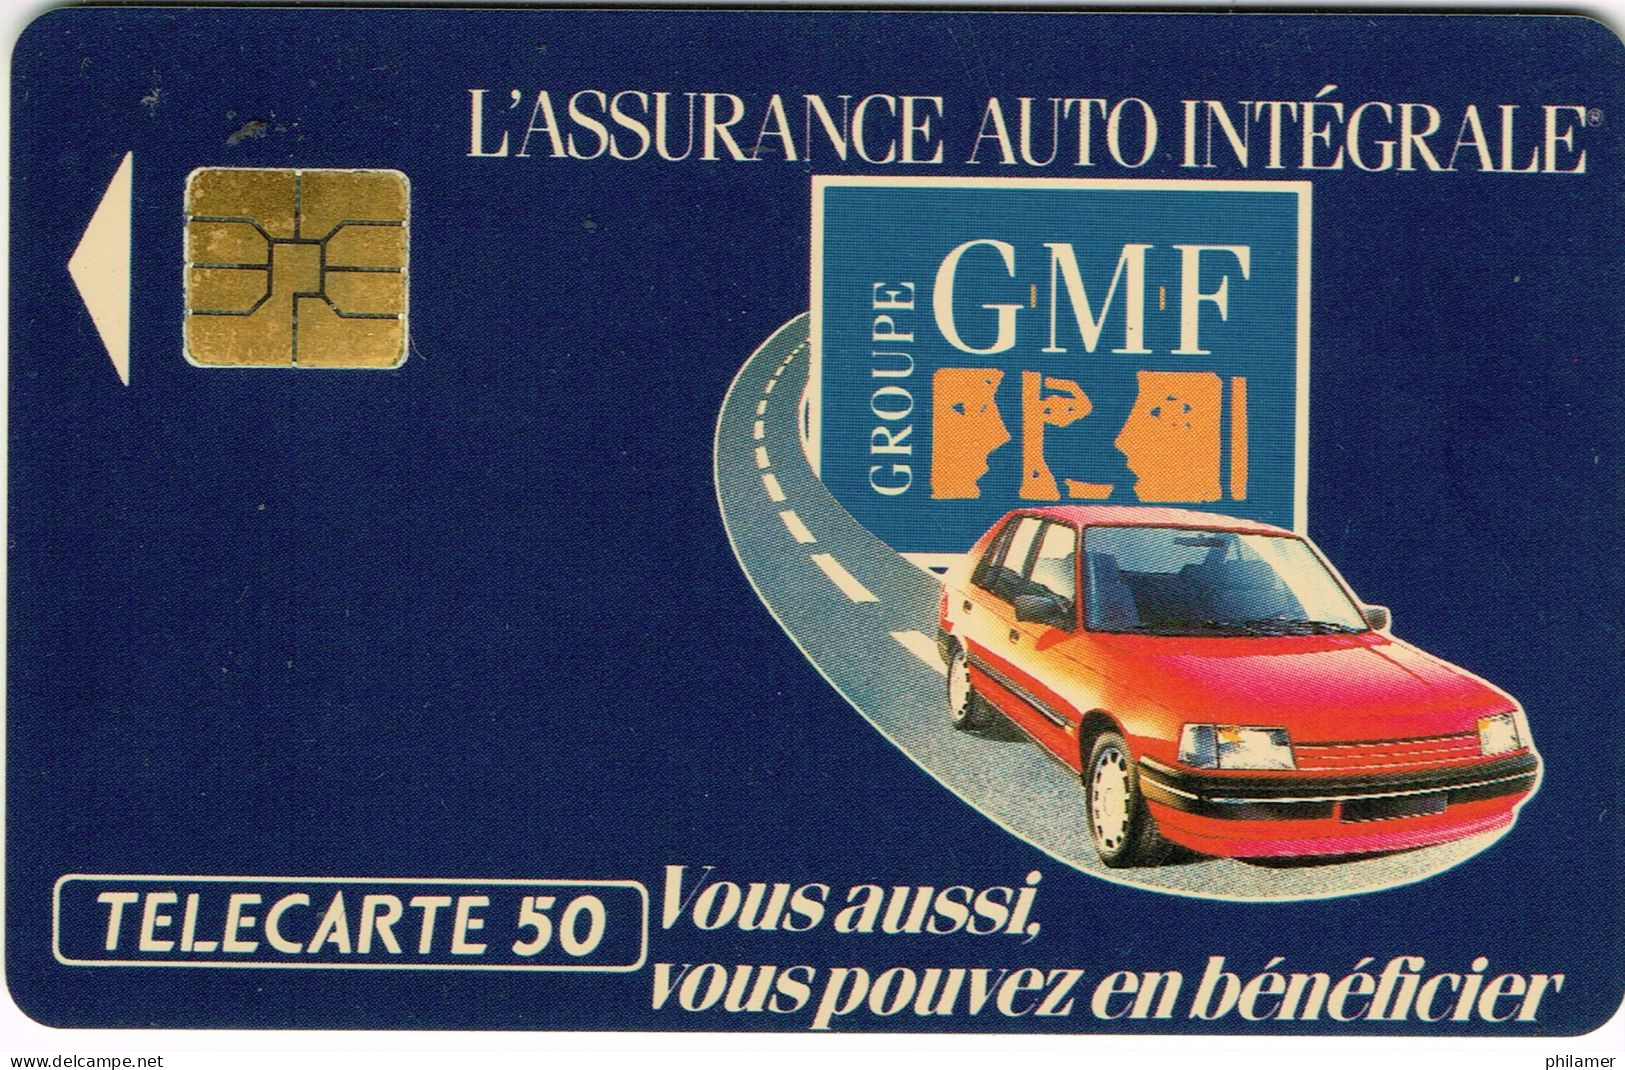 France French Telecarte Phonecard Prive EN203 GMF Assurance Auto Integrale Voiture Auto Car UT BE - Phonecards: Private Use